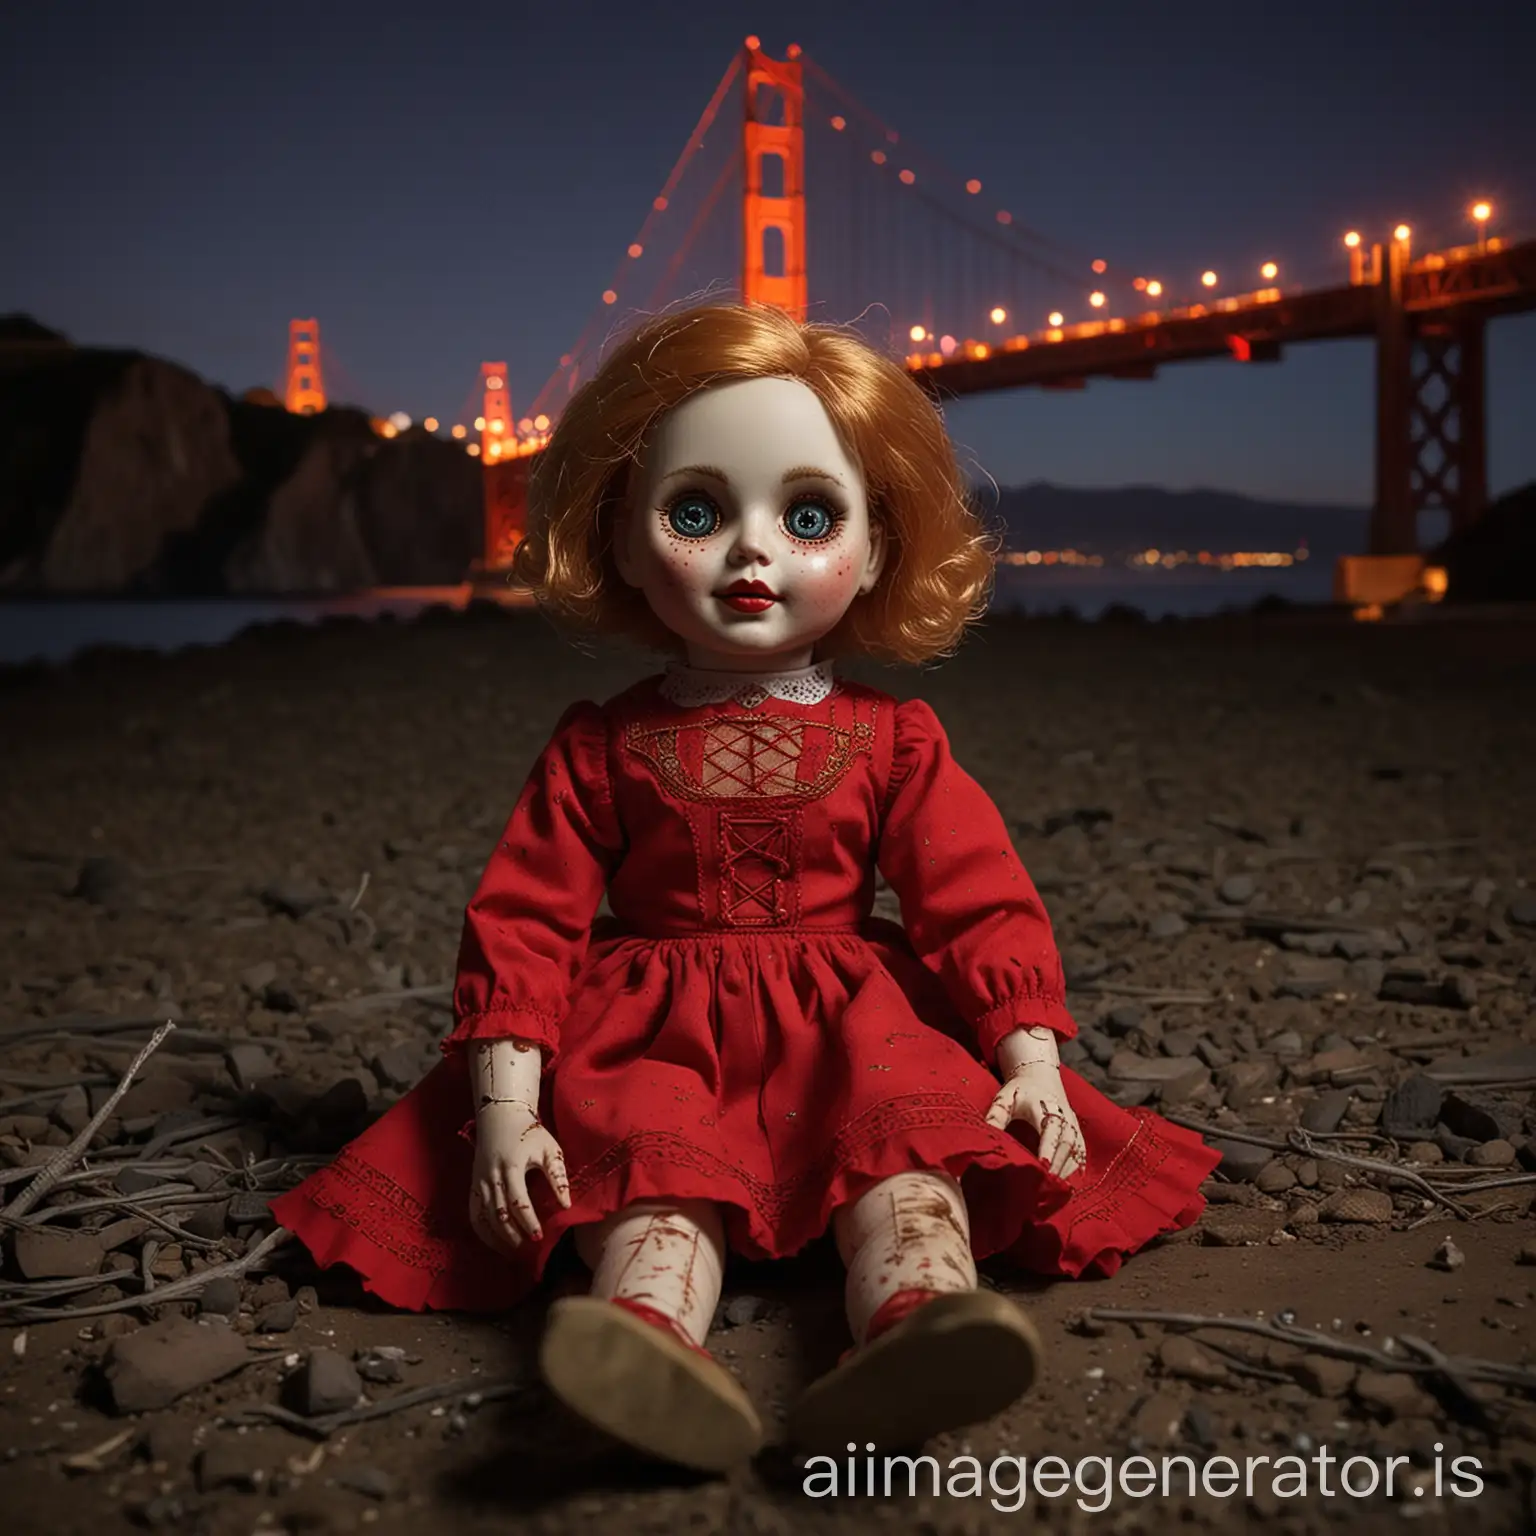 create a portrait image of a creepy doll inspired by the 'Golden Gate Doll' in California, in broad night time, laying on the ground facing the camera, with The Golden Gate Bridge in the background, and she is wearing red